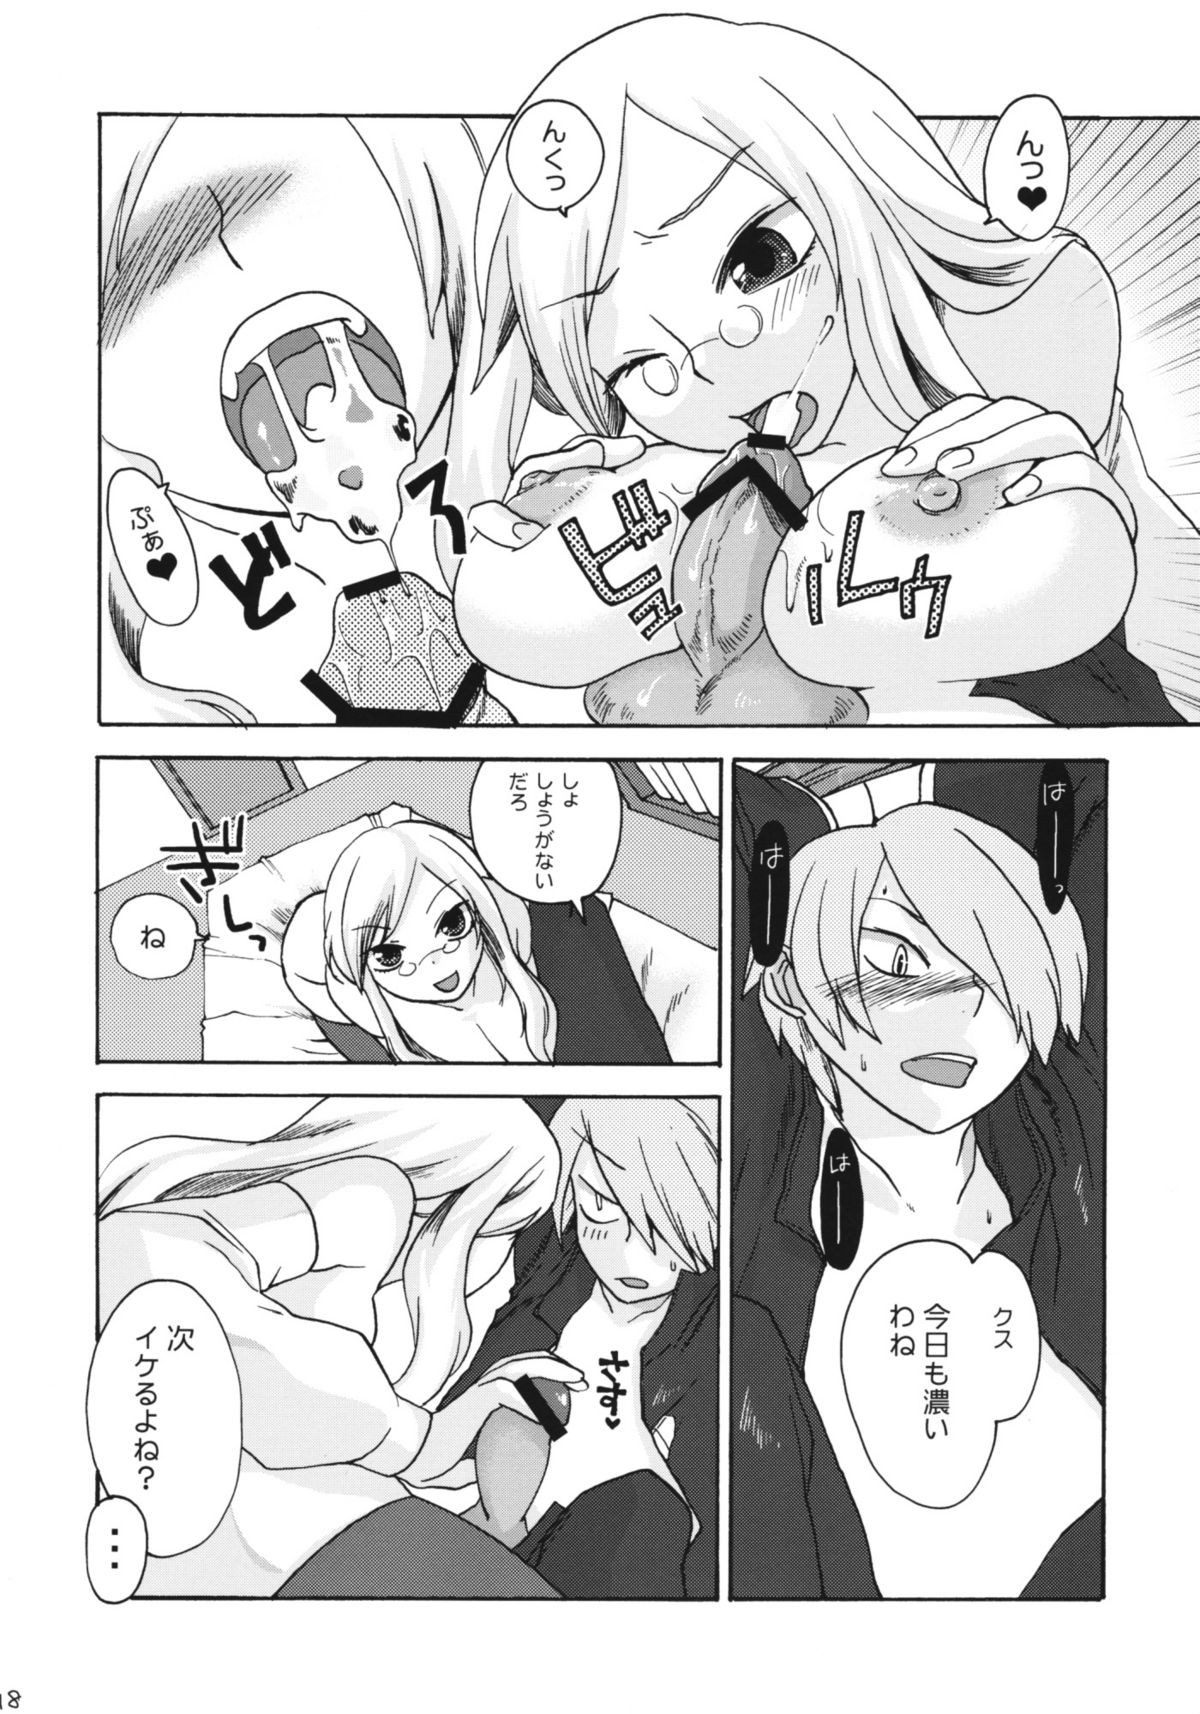 (ComiComi13) [Trip Spider (niwacho)] In You And Me (7th DRAGON) page 17 full